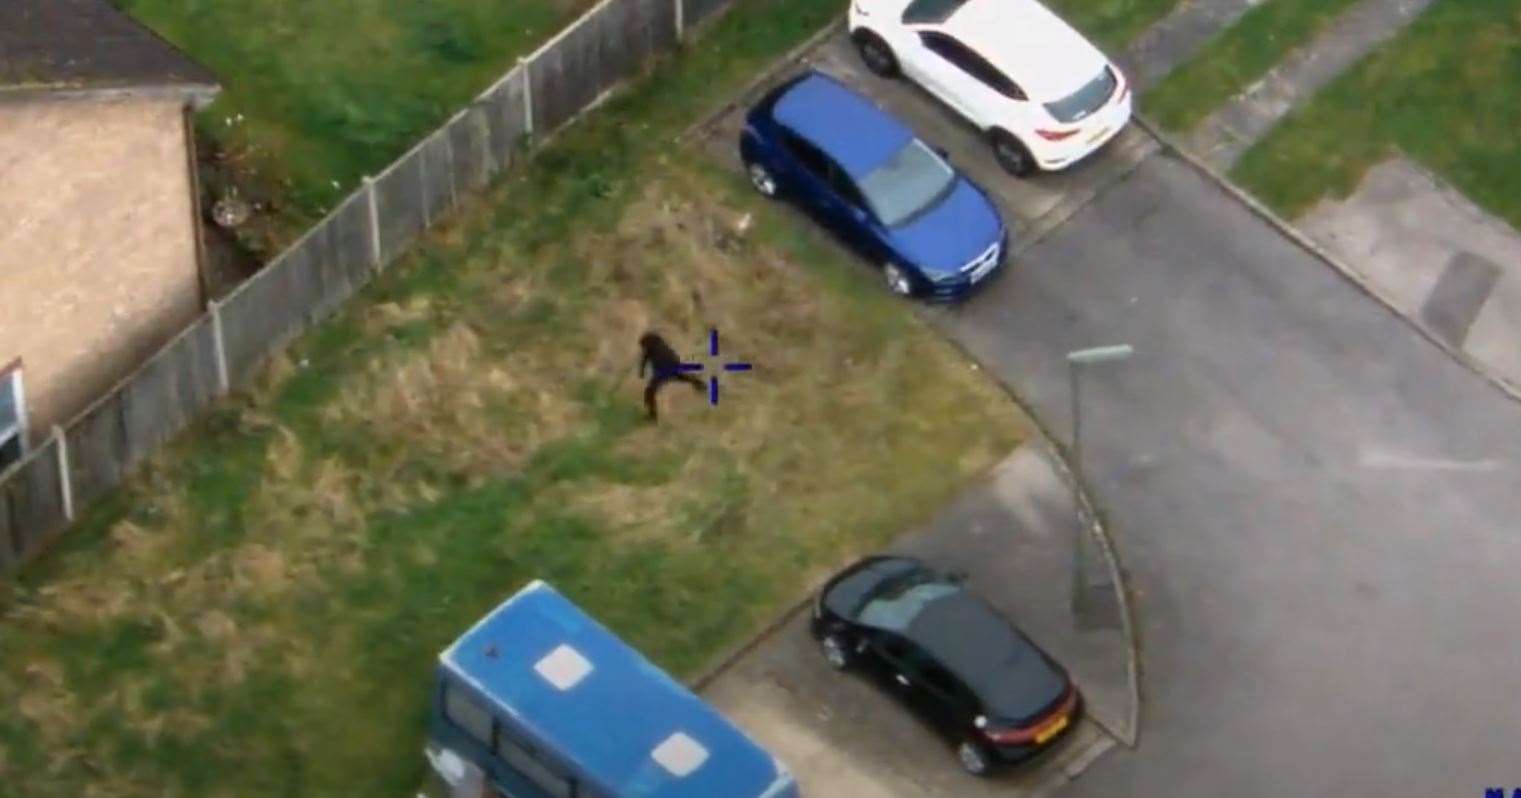 The father-of-four ditched the gun before jumping over a fence. Picture: Kent Police